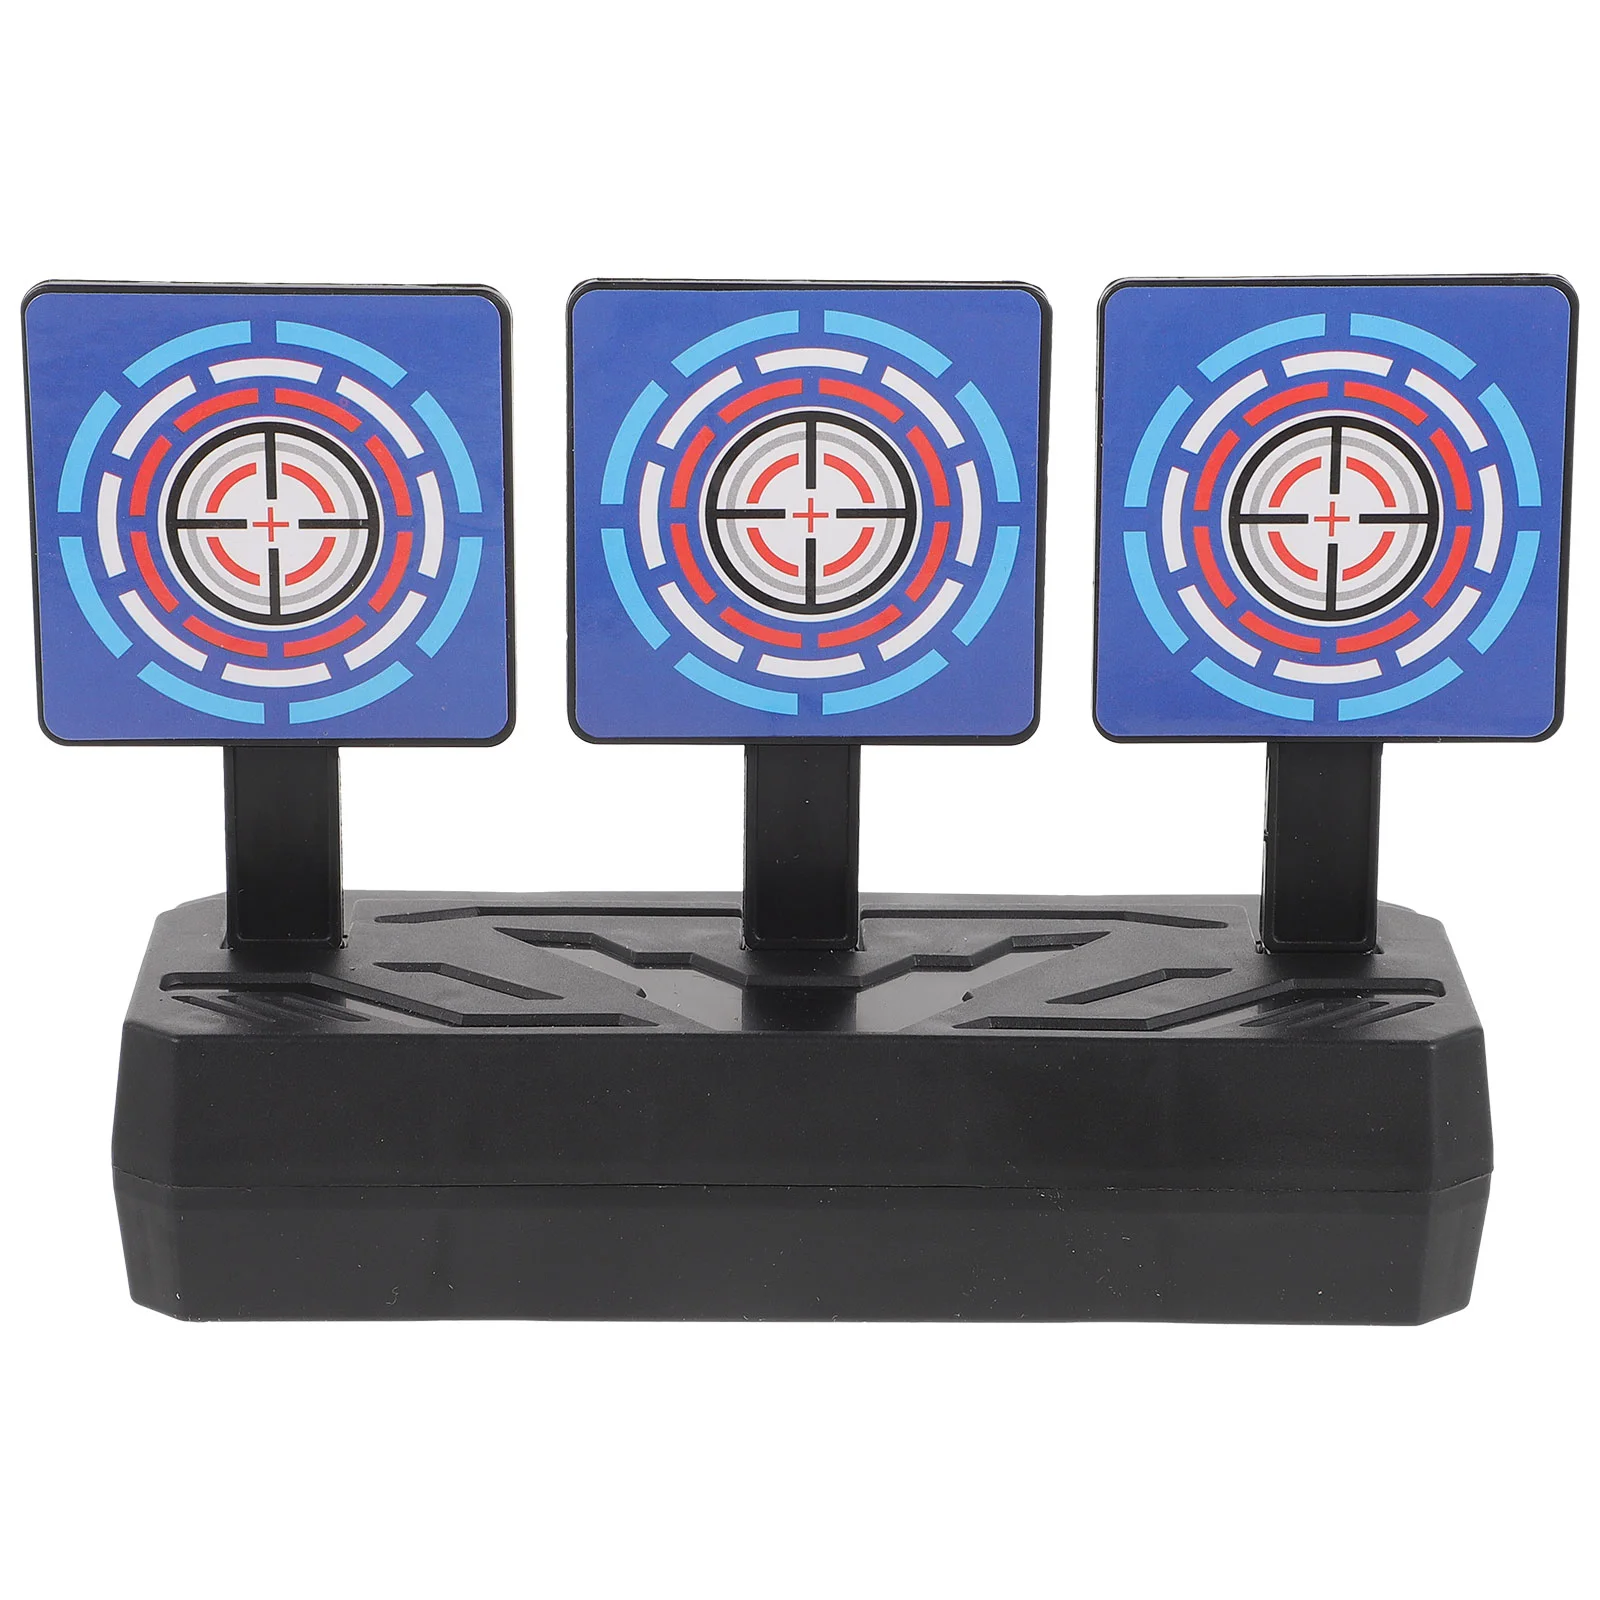 

Auto Resetting Target Toy Interactive Sports Toy Creative Auto Return Target for Practice